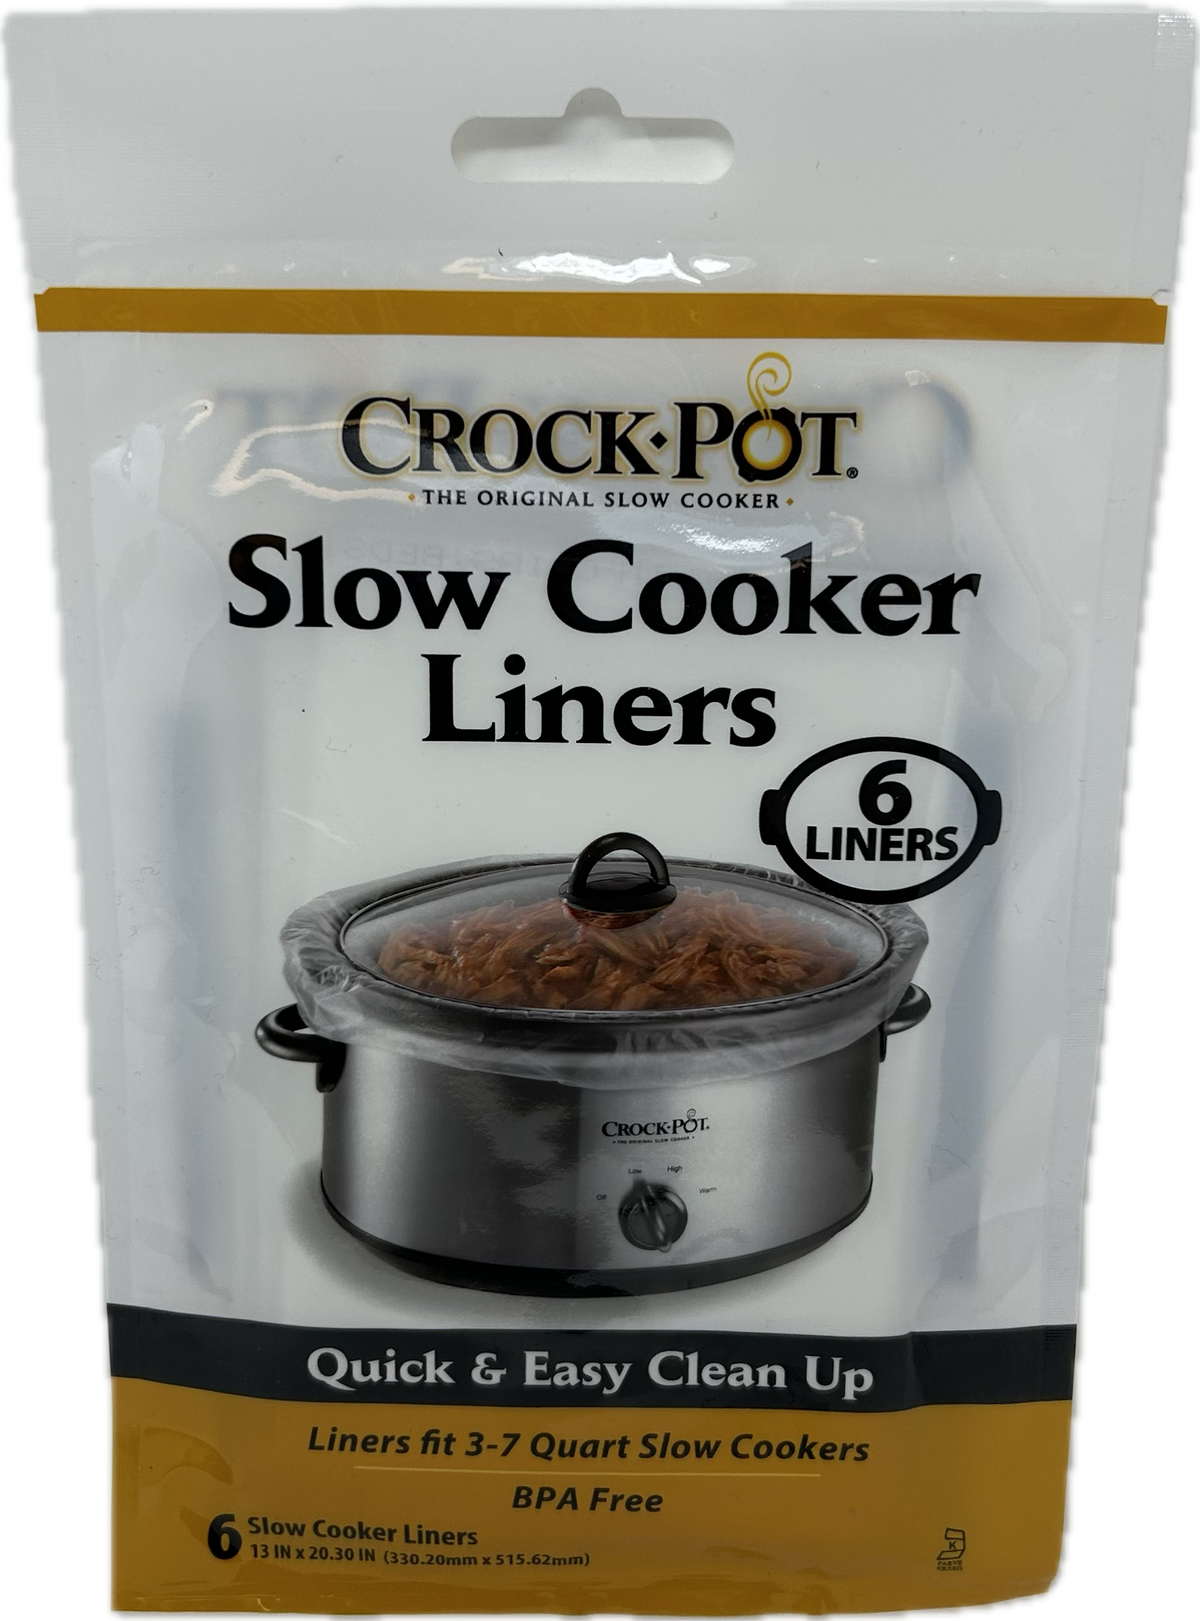 Crockpot Slow Cooker Liners 6Liners